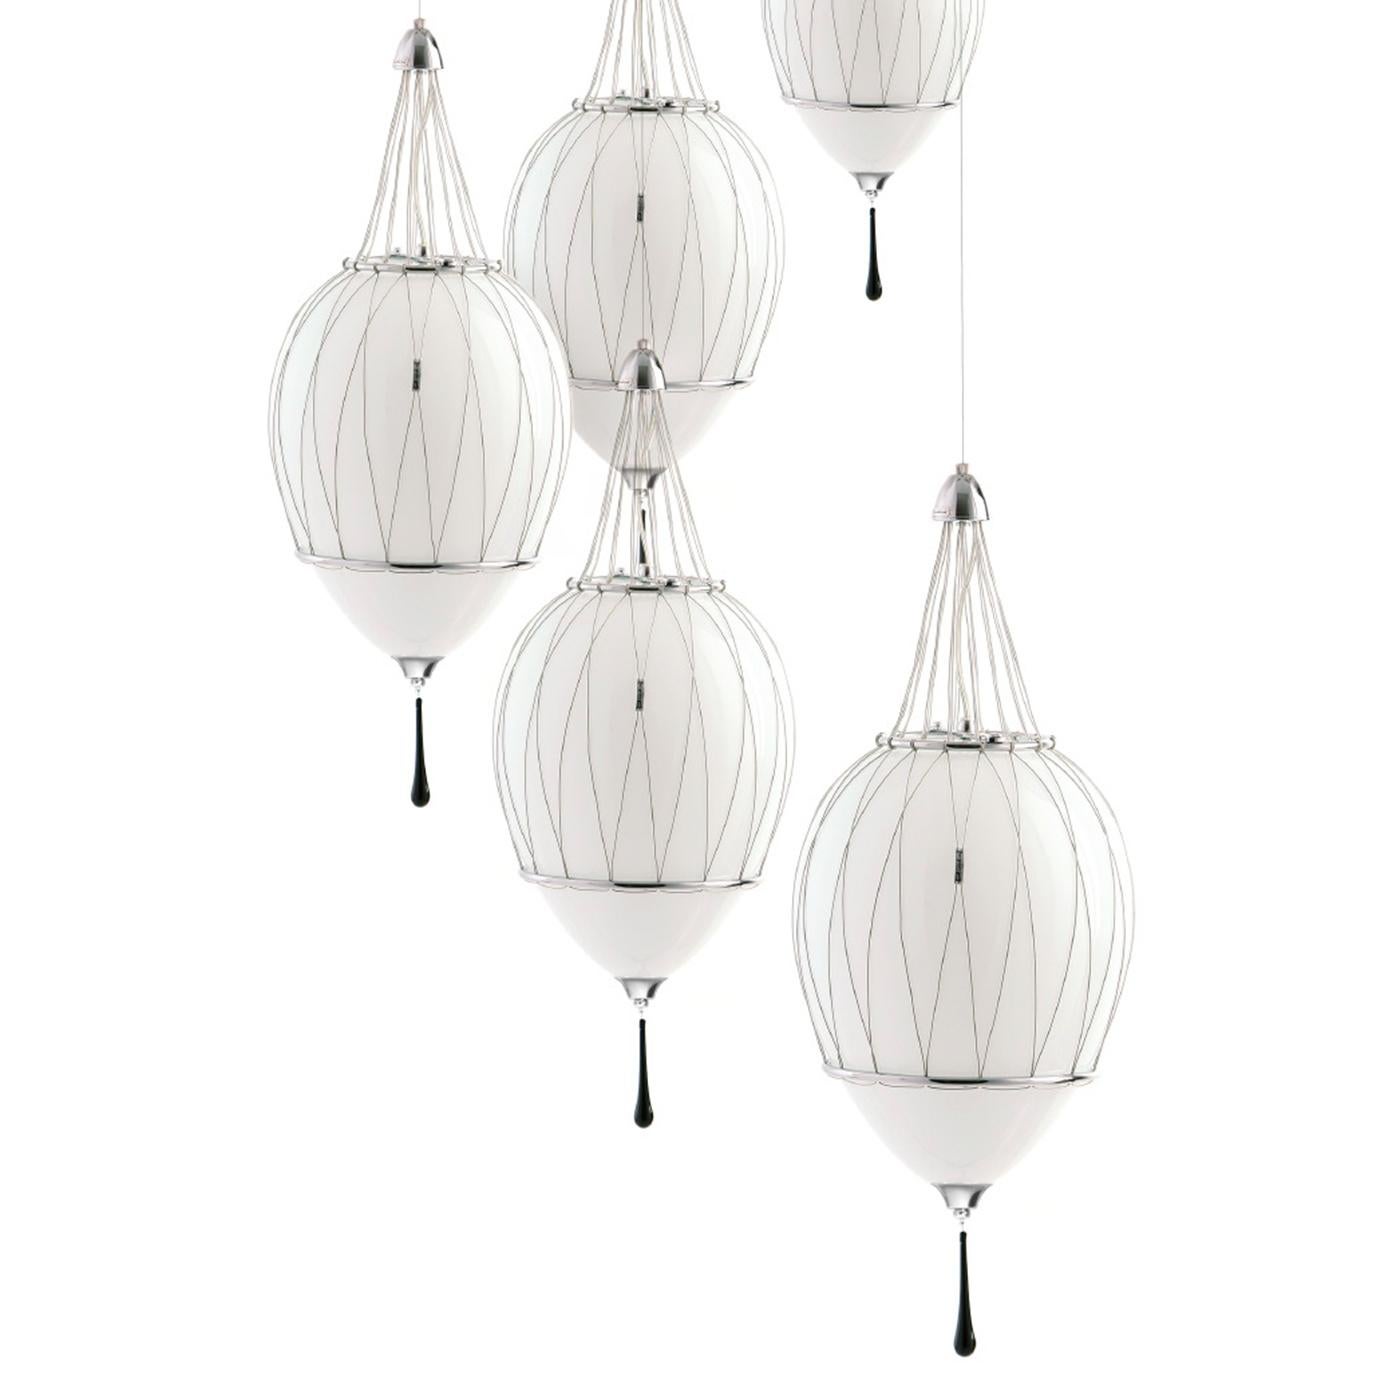 Inspired by Art Deco style, this superb pendant lamp features an alluring design that blends classic elegance with a modern allure that will enrich any interior with luxury. This exclusive piece from the Tango Collection boasts an egg-shaped shade